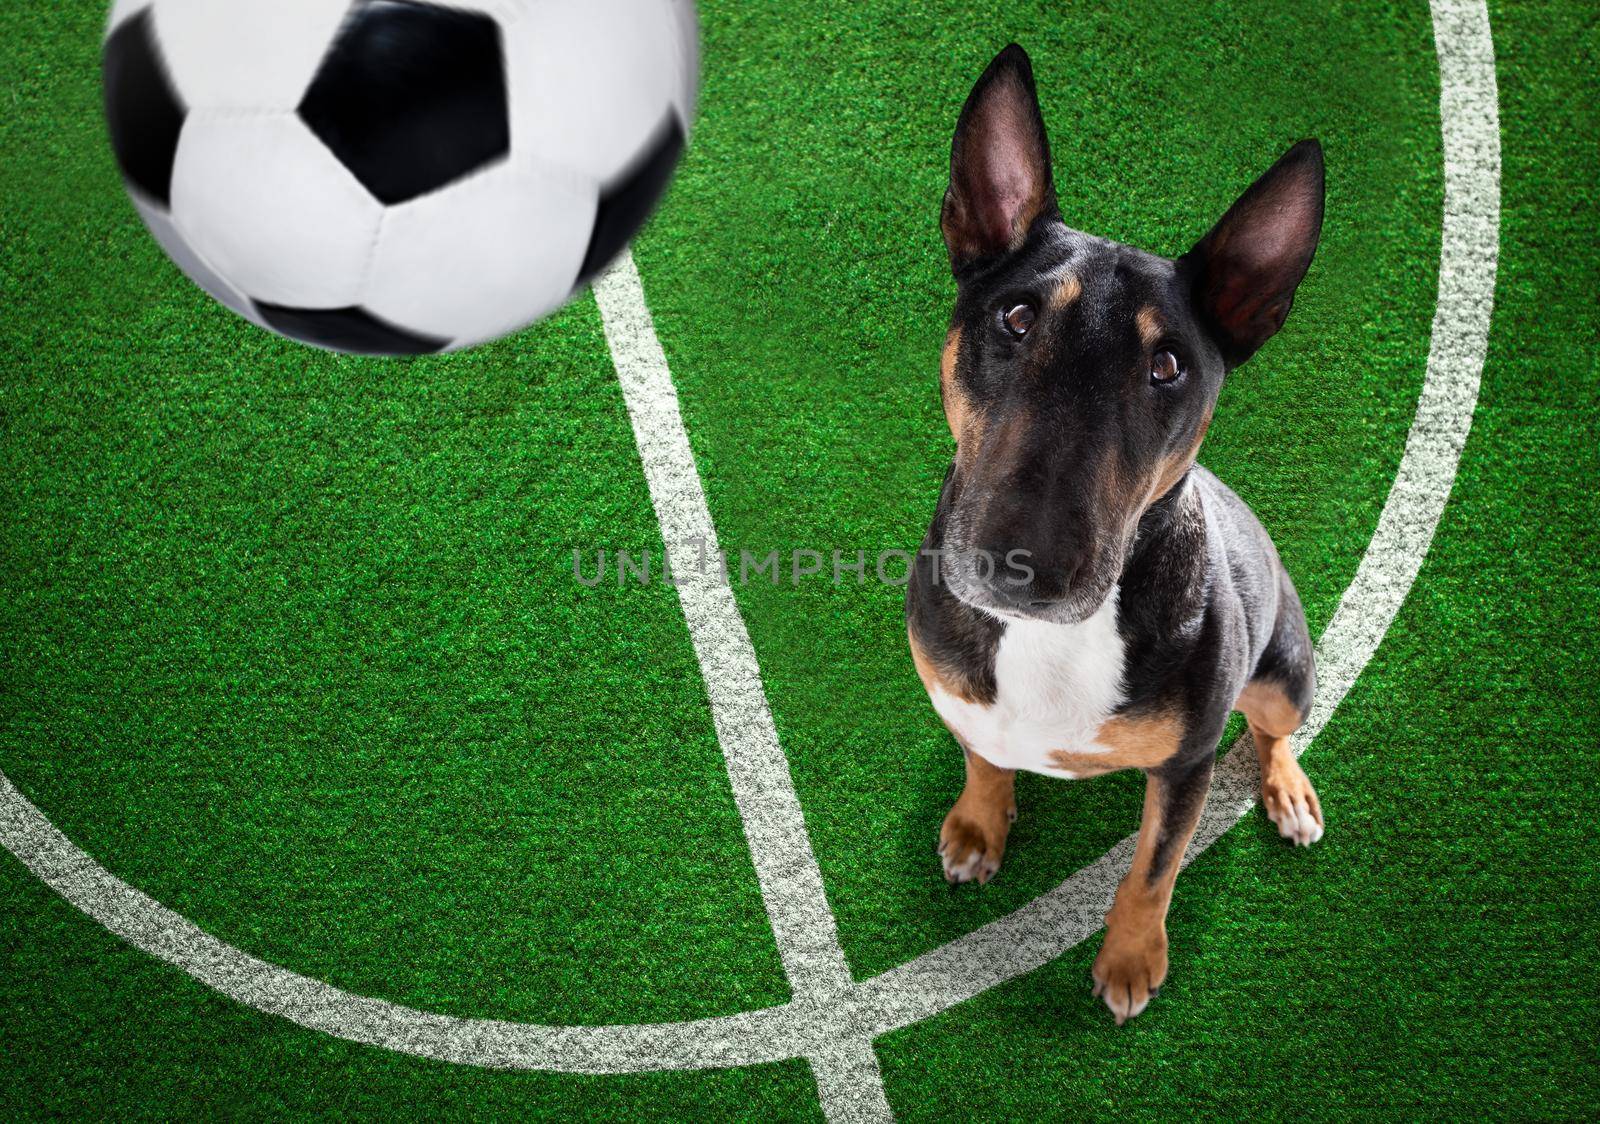 soccer bull terrier  dog playing with leather ball  , on football grass field